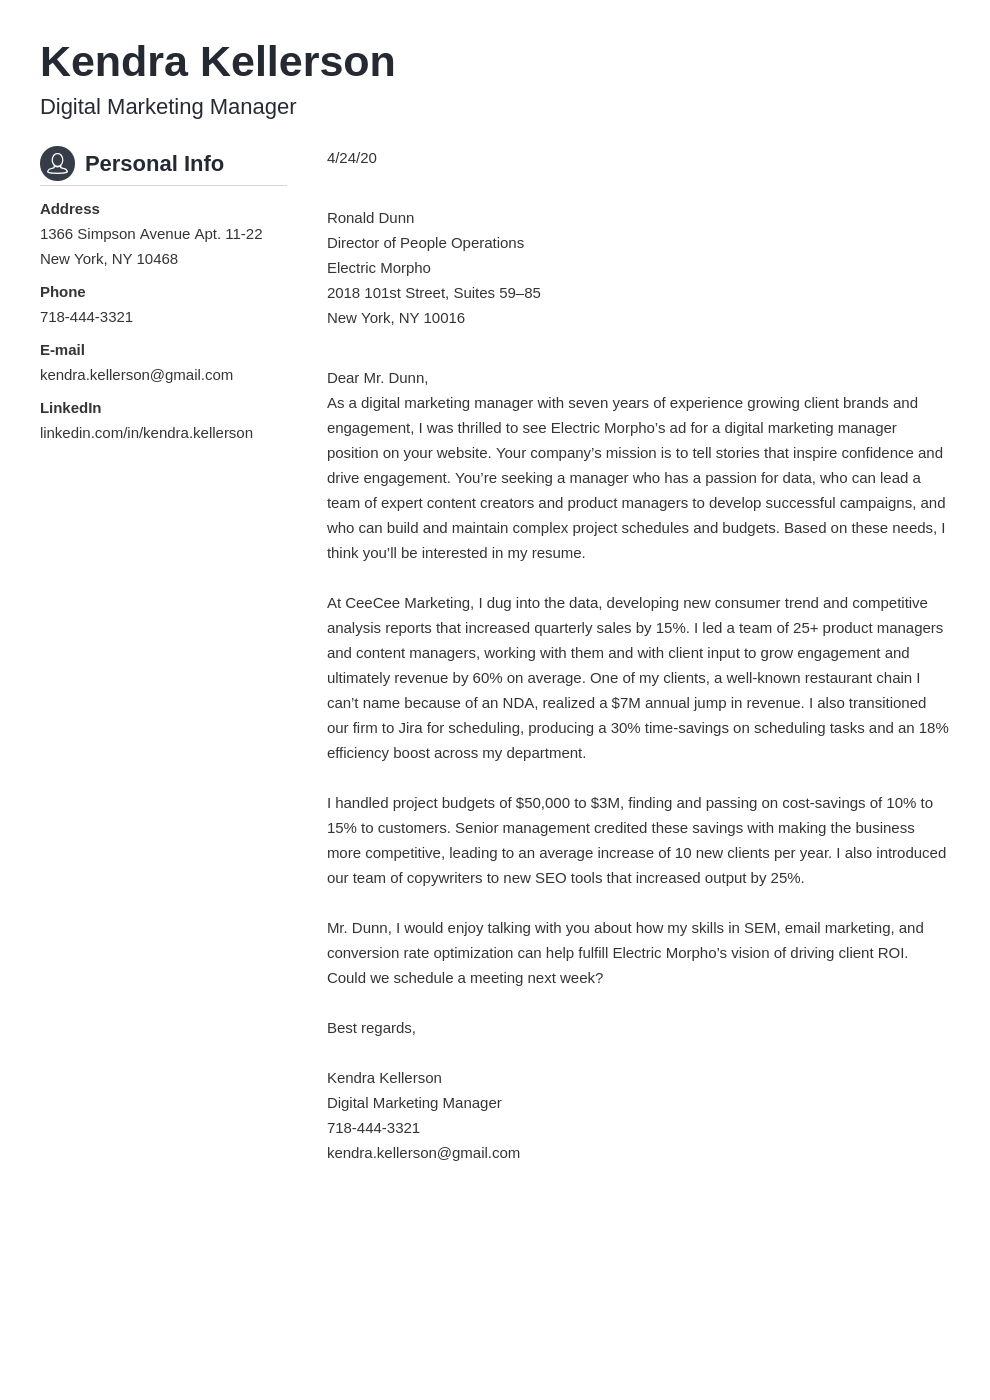 cover letter example for digital marketing